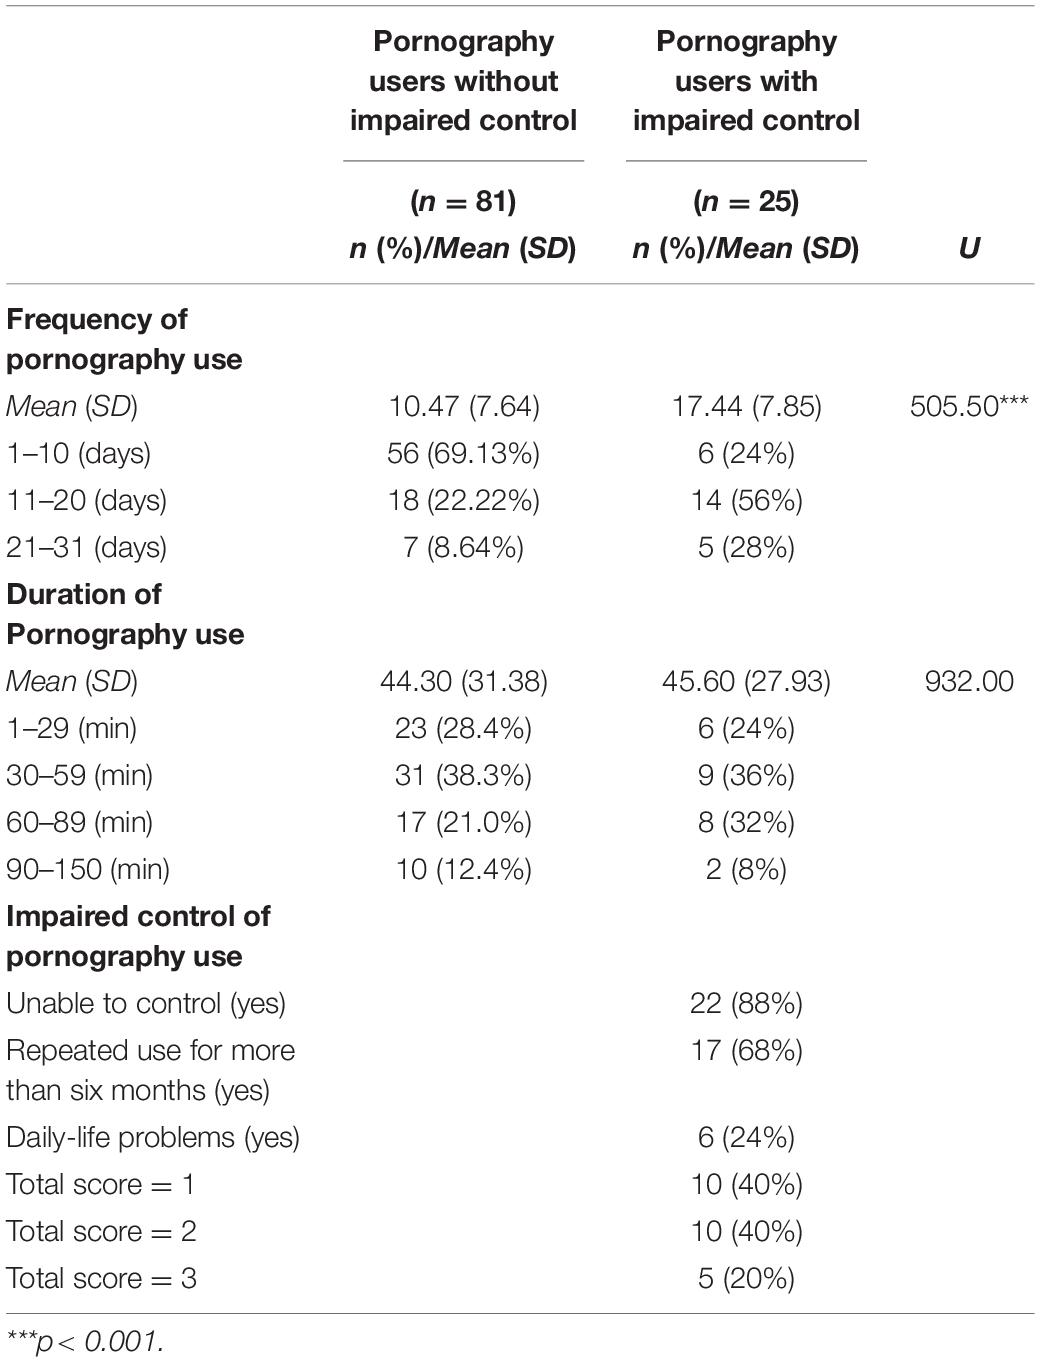 Japan School Tichar Rep Pron Hd - Frontiers | Problematic Pornography Use in Japan: A Preliminary Study Among  University Students